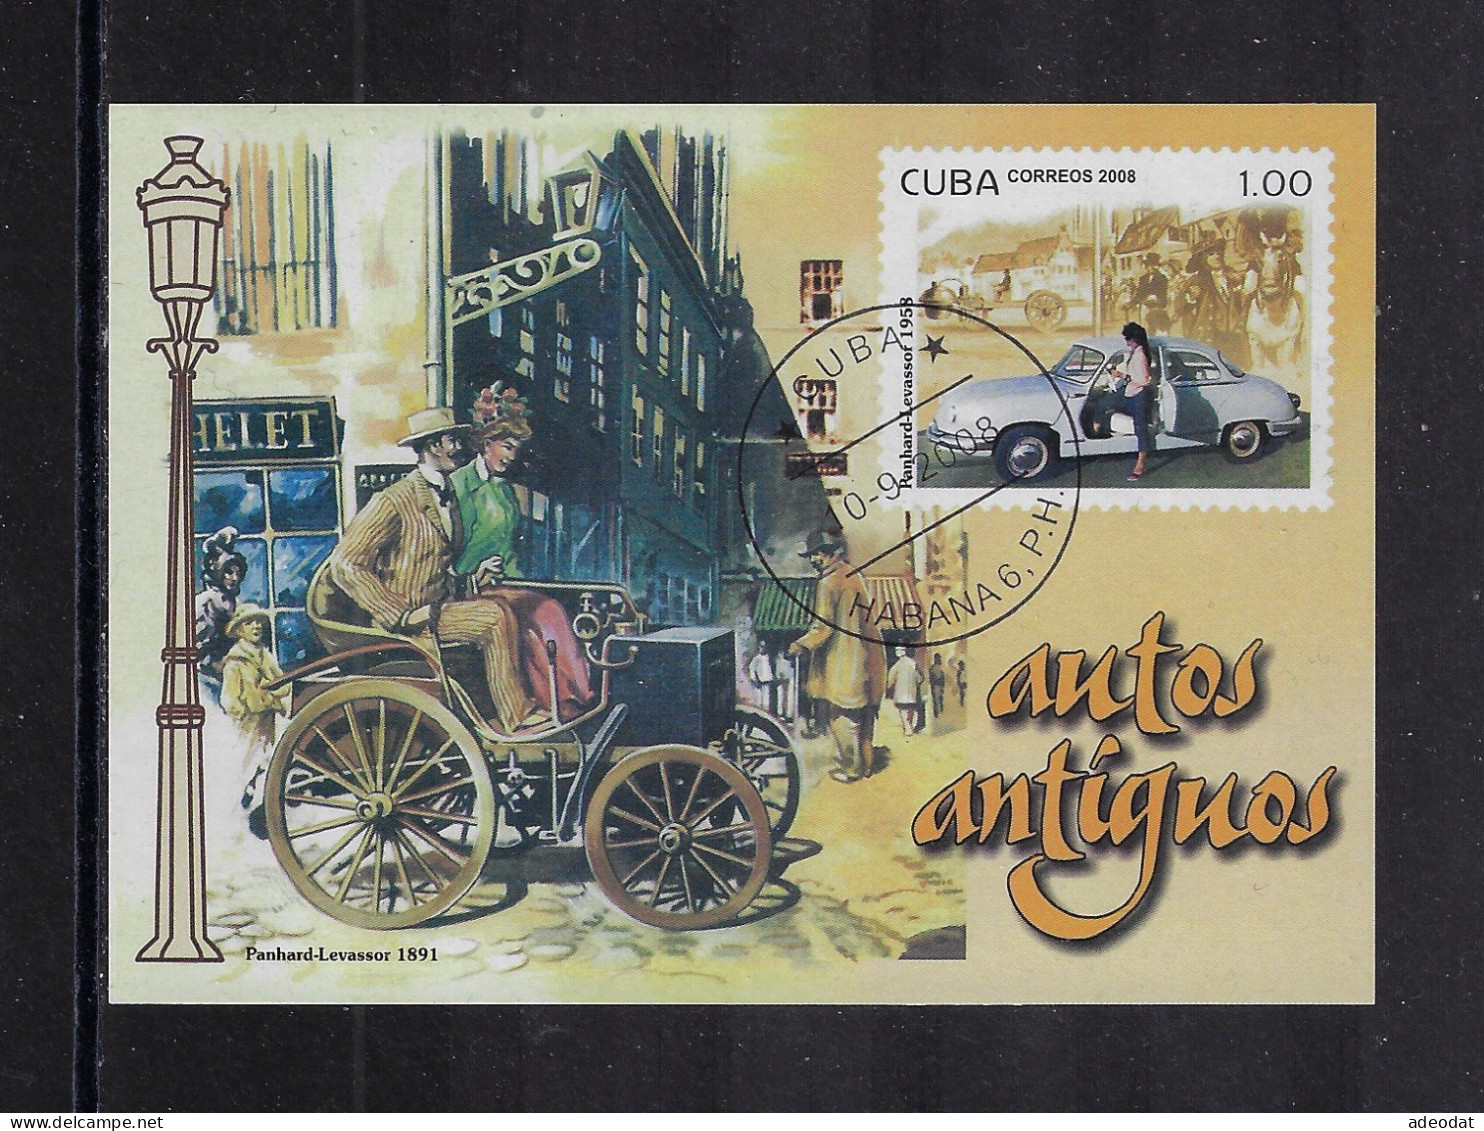 CUBA 2008 MINI SHEET VINTAGE CARS  STAMPWORLD 5136 CANCELLED - Used Stamps